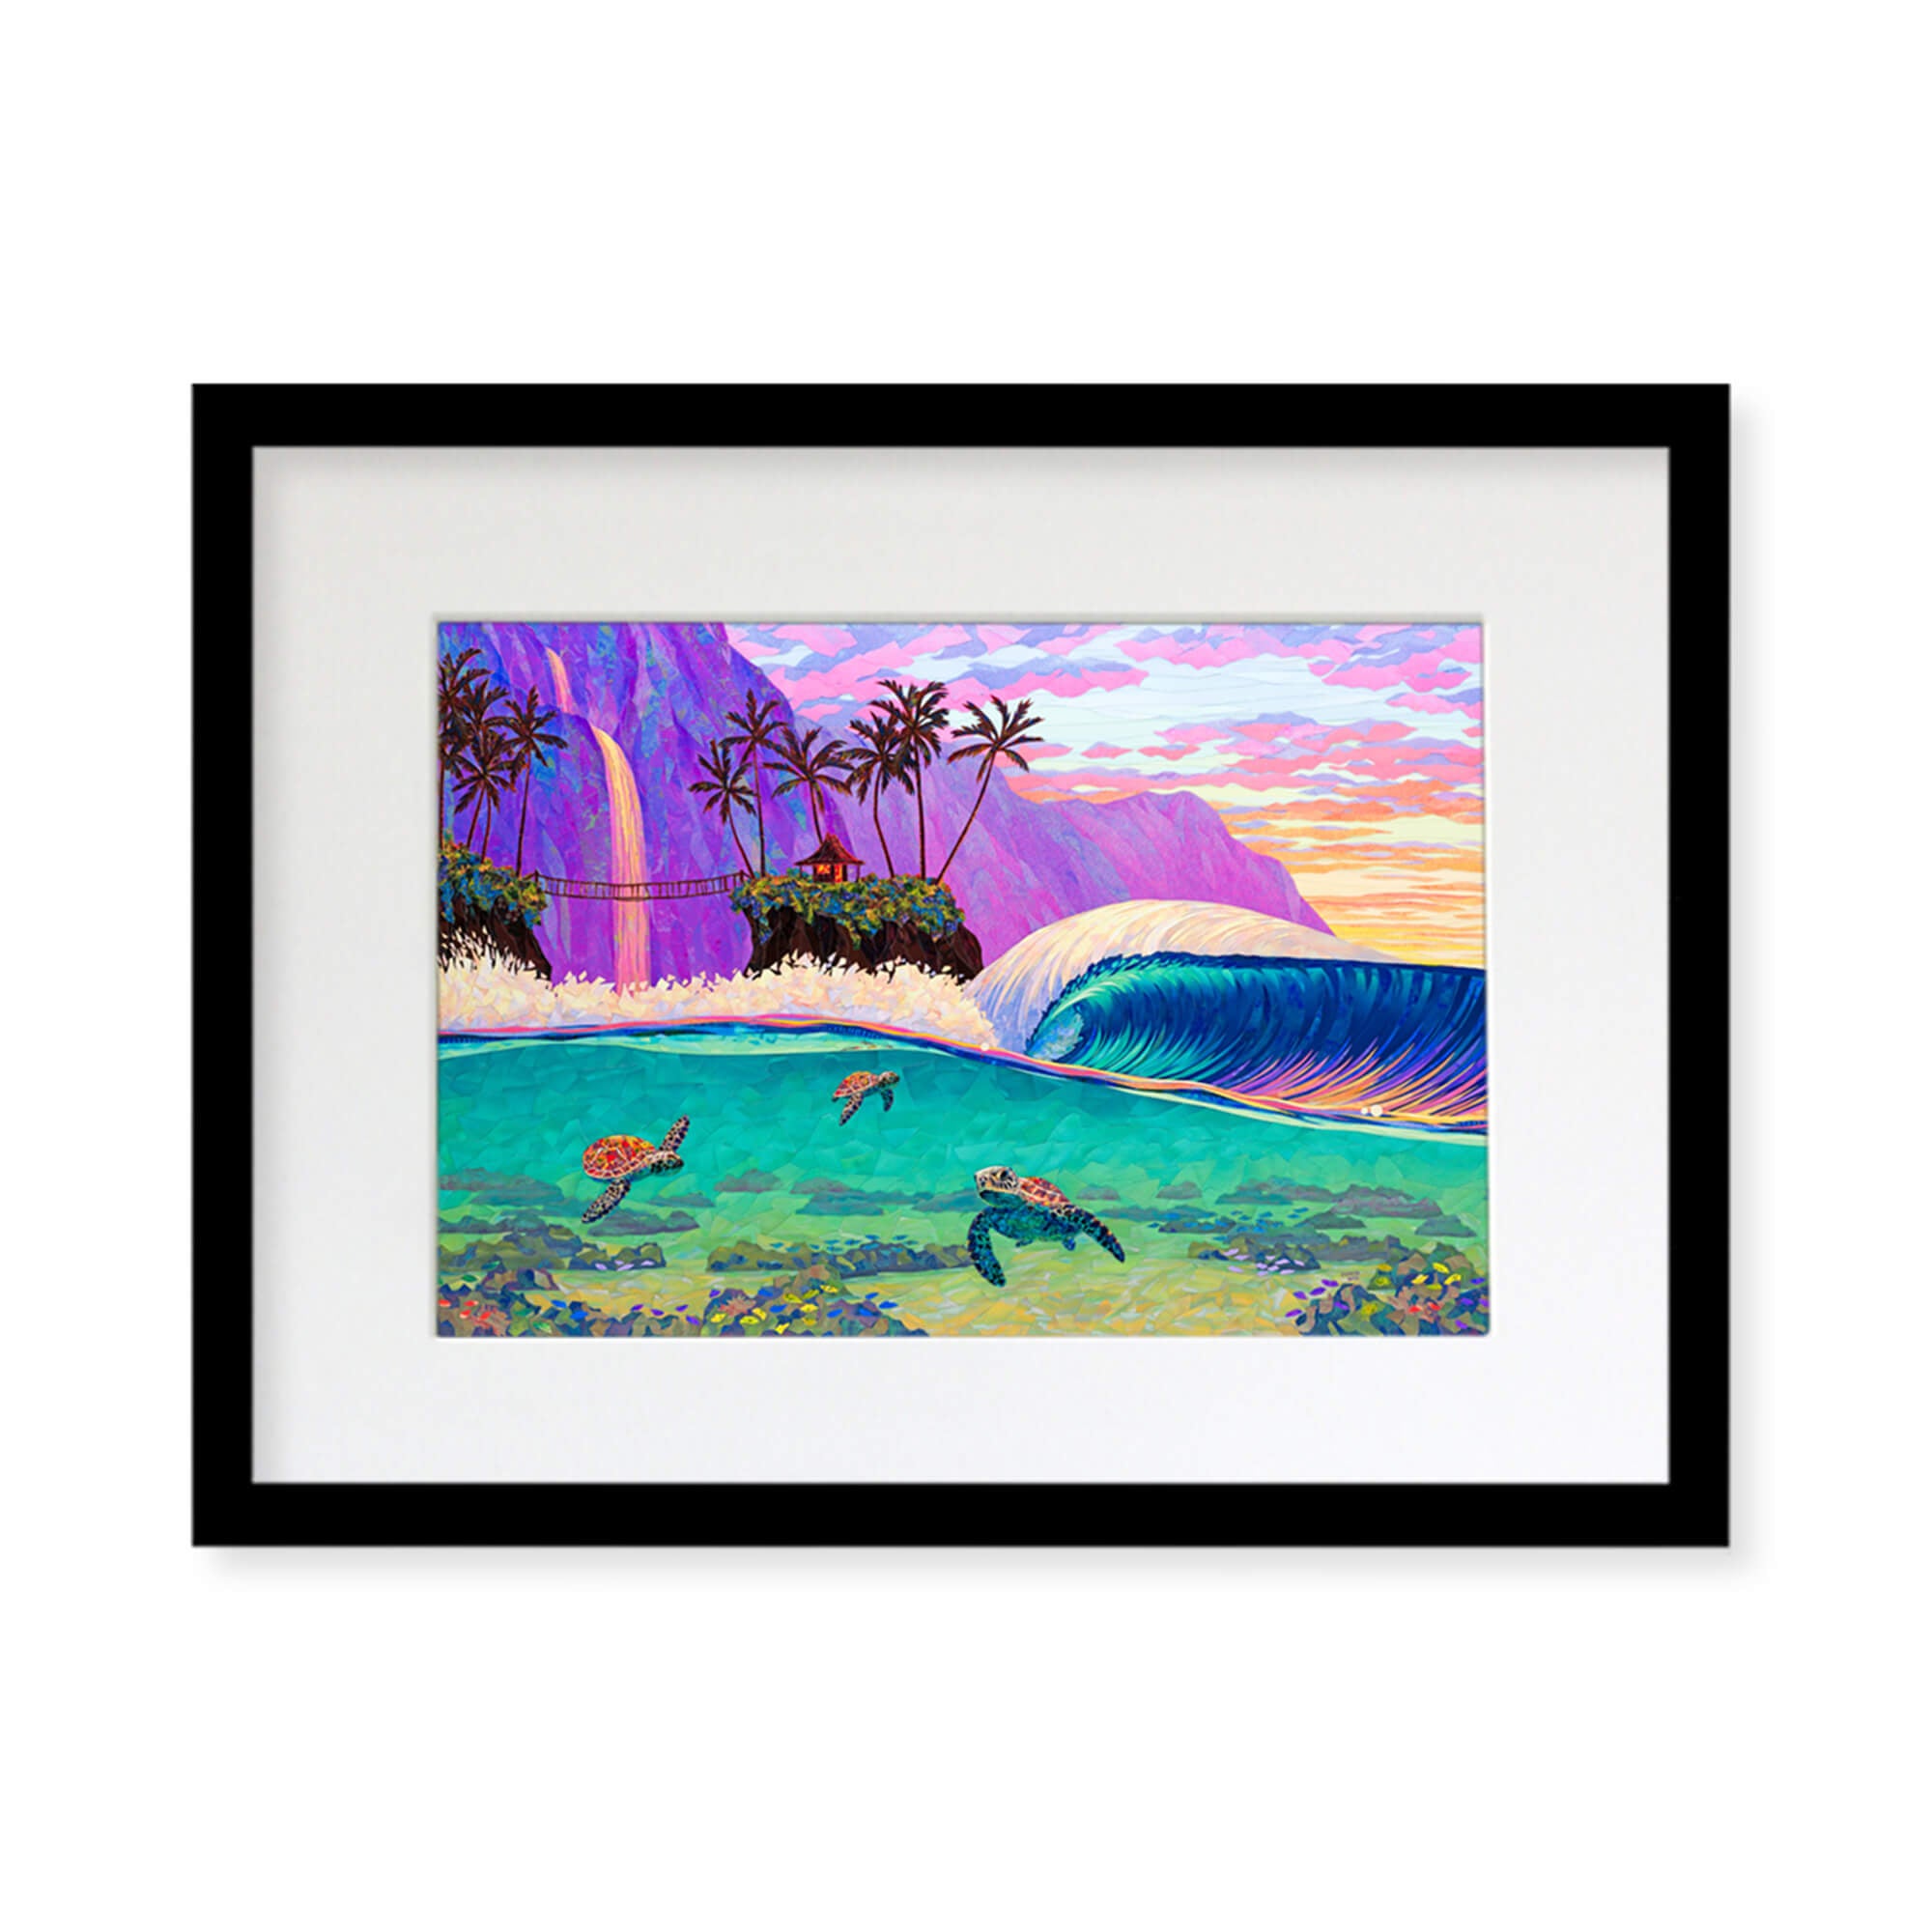 A framed matted art print featuring a collage of a stunning seascape with three sea turtles, a hut on an island, and a colorful mountain with a waterfall background by Hawaii artist Patrick Parker